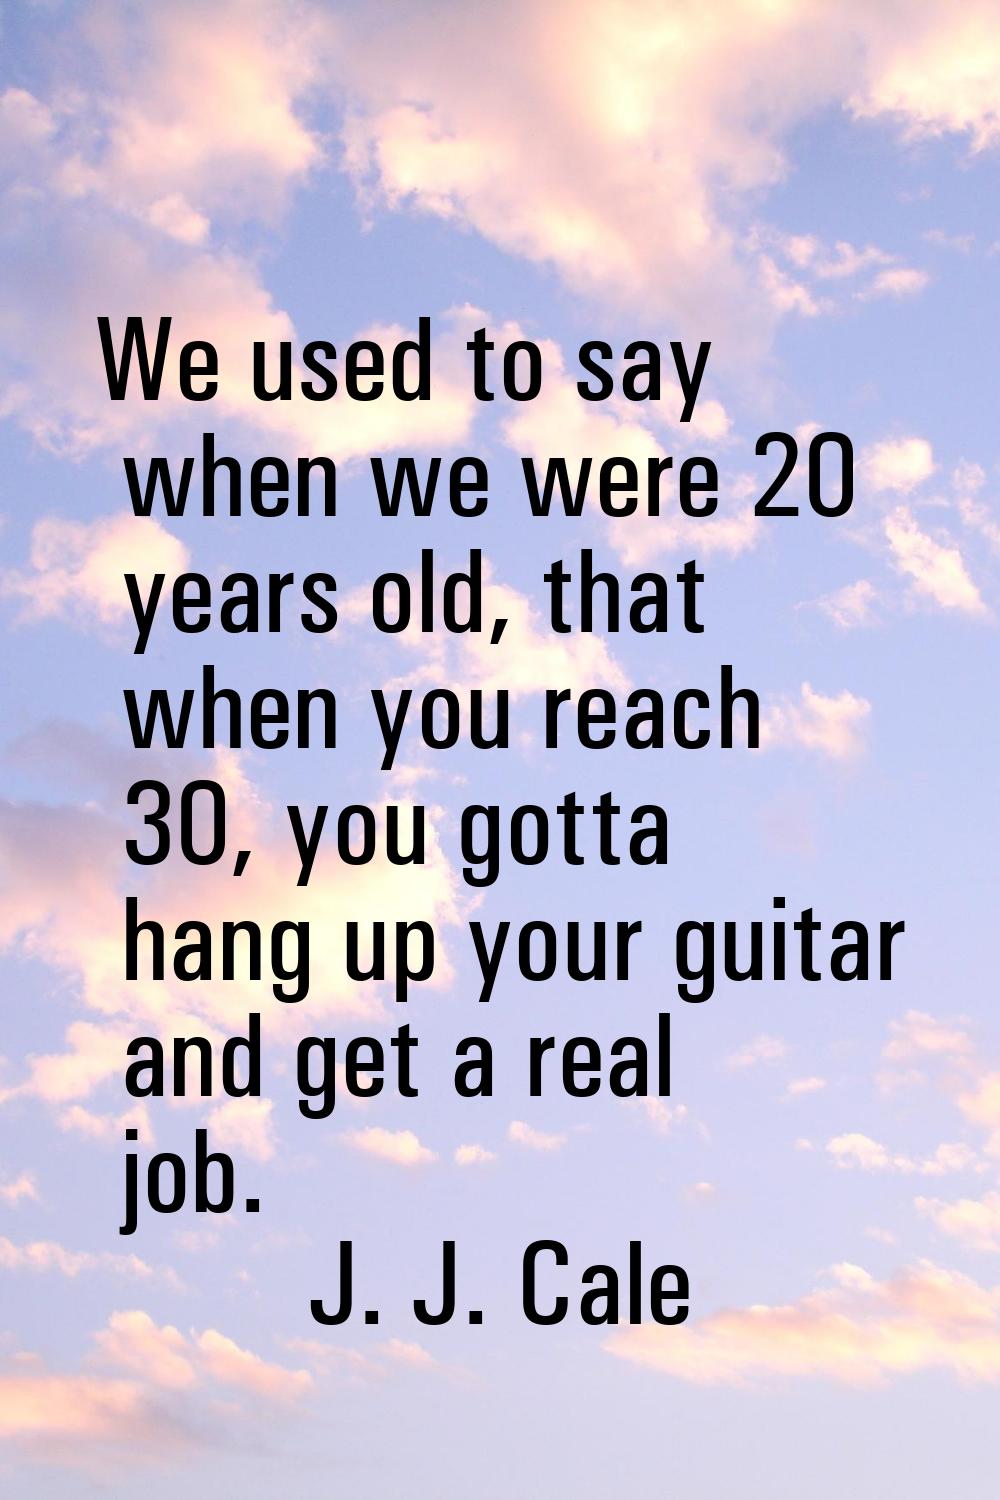 We used to say when we were 20 years old, that when you reach 30, you gotta hang up your guitar and